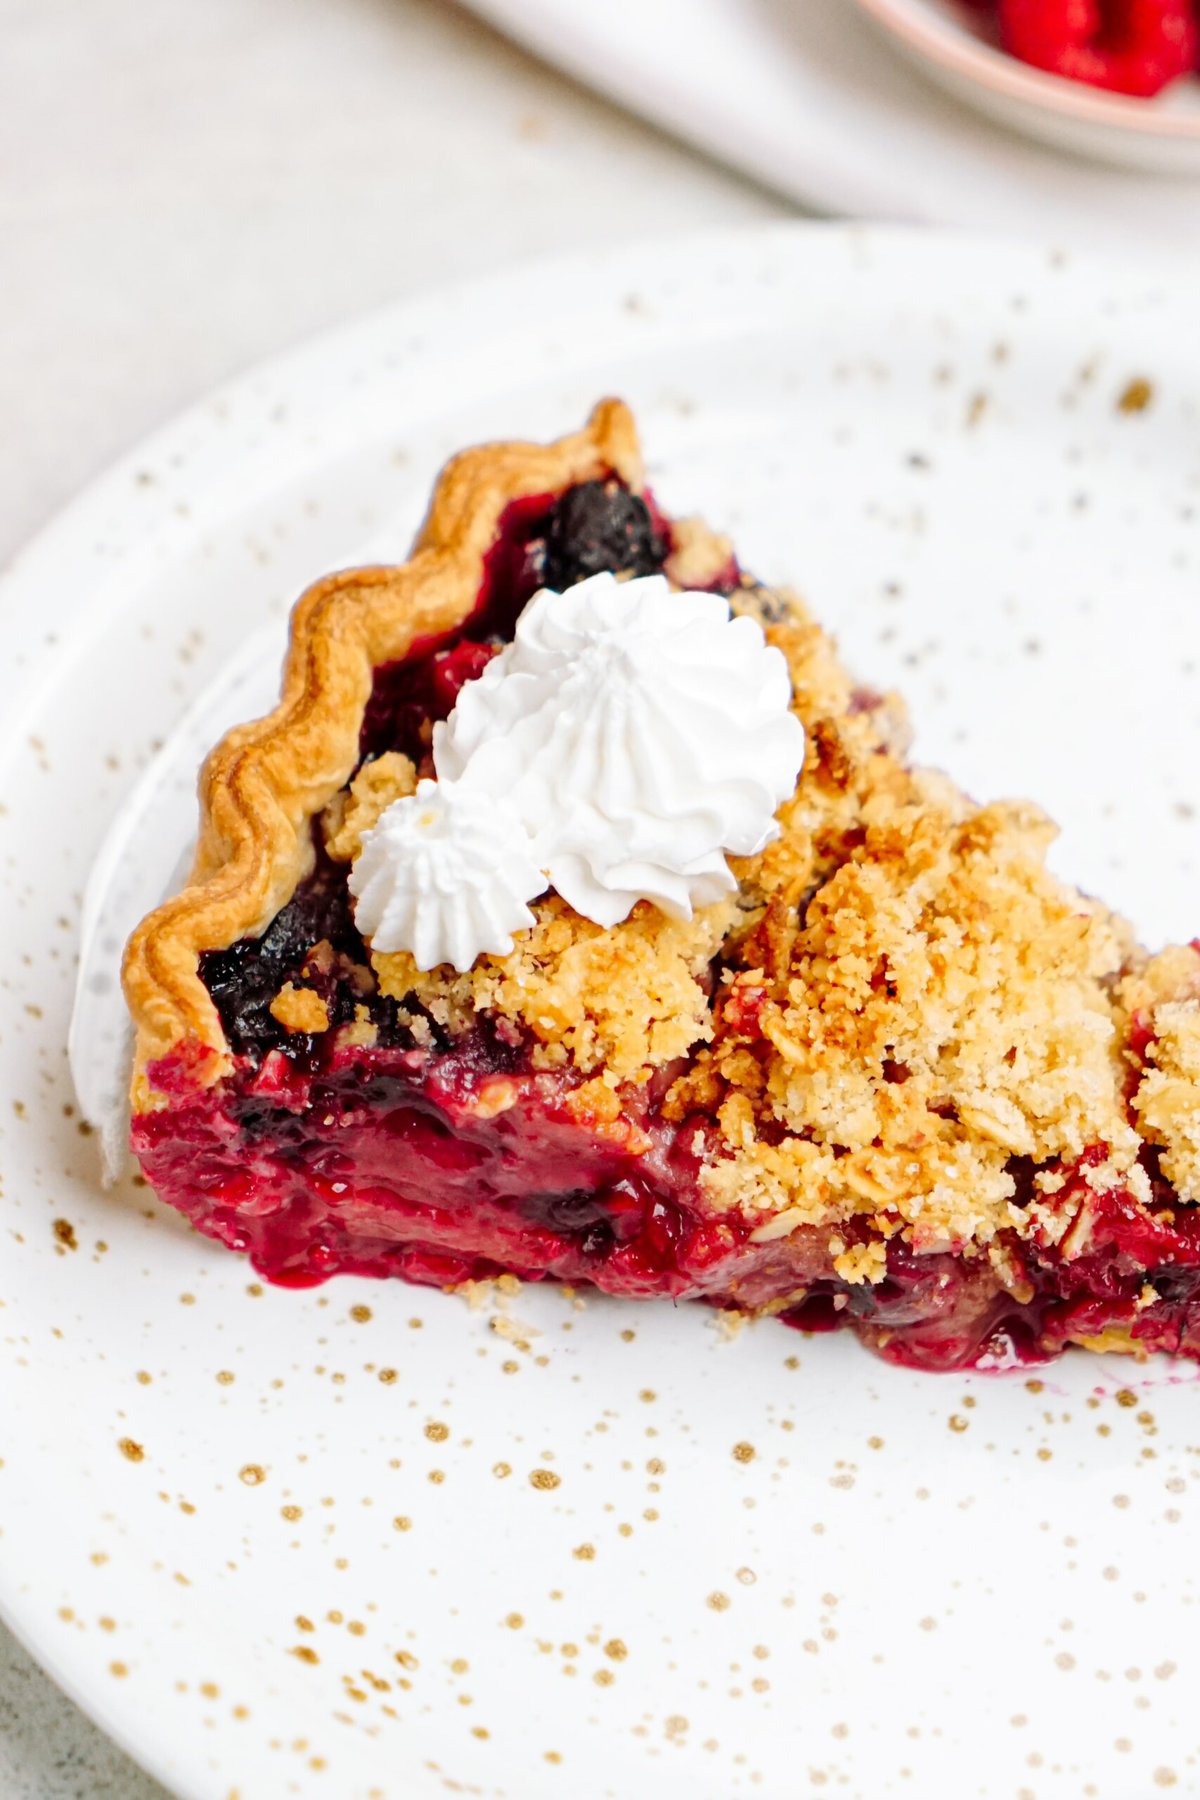 A slice of berry crumble pie topped with a dollop of whipped cream on a white plate.